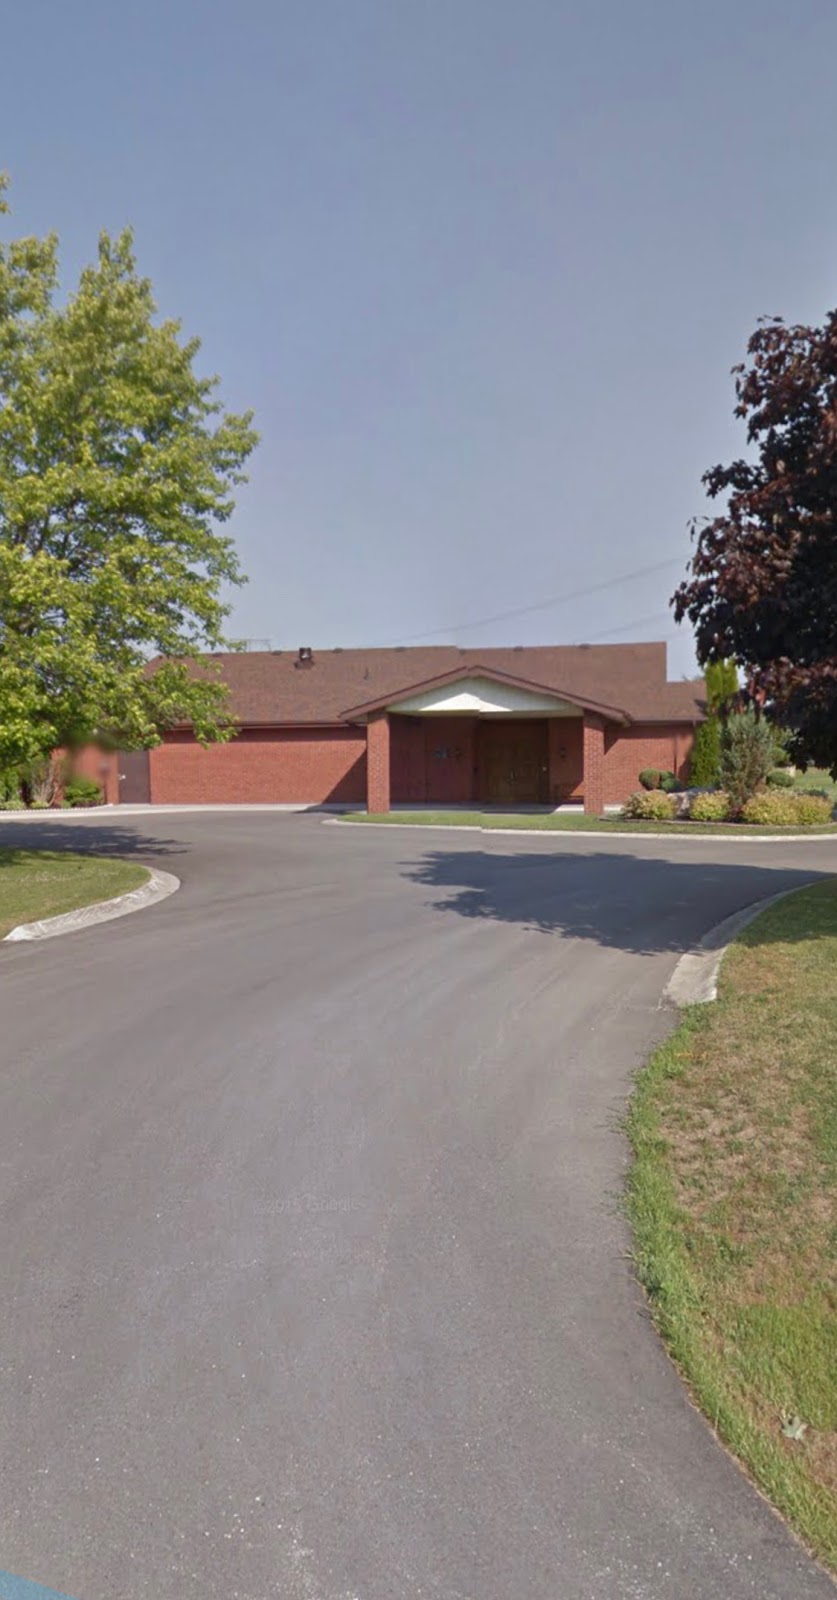 Kingdom Hall of Jehovahs Witnesses | church | Gore Rd & Sunset Dr, St Thomas, ON N0L 2K0, Canada | 5196314245 OR +1 519-631-4245